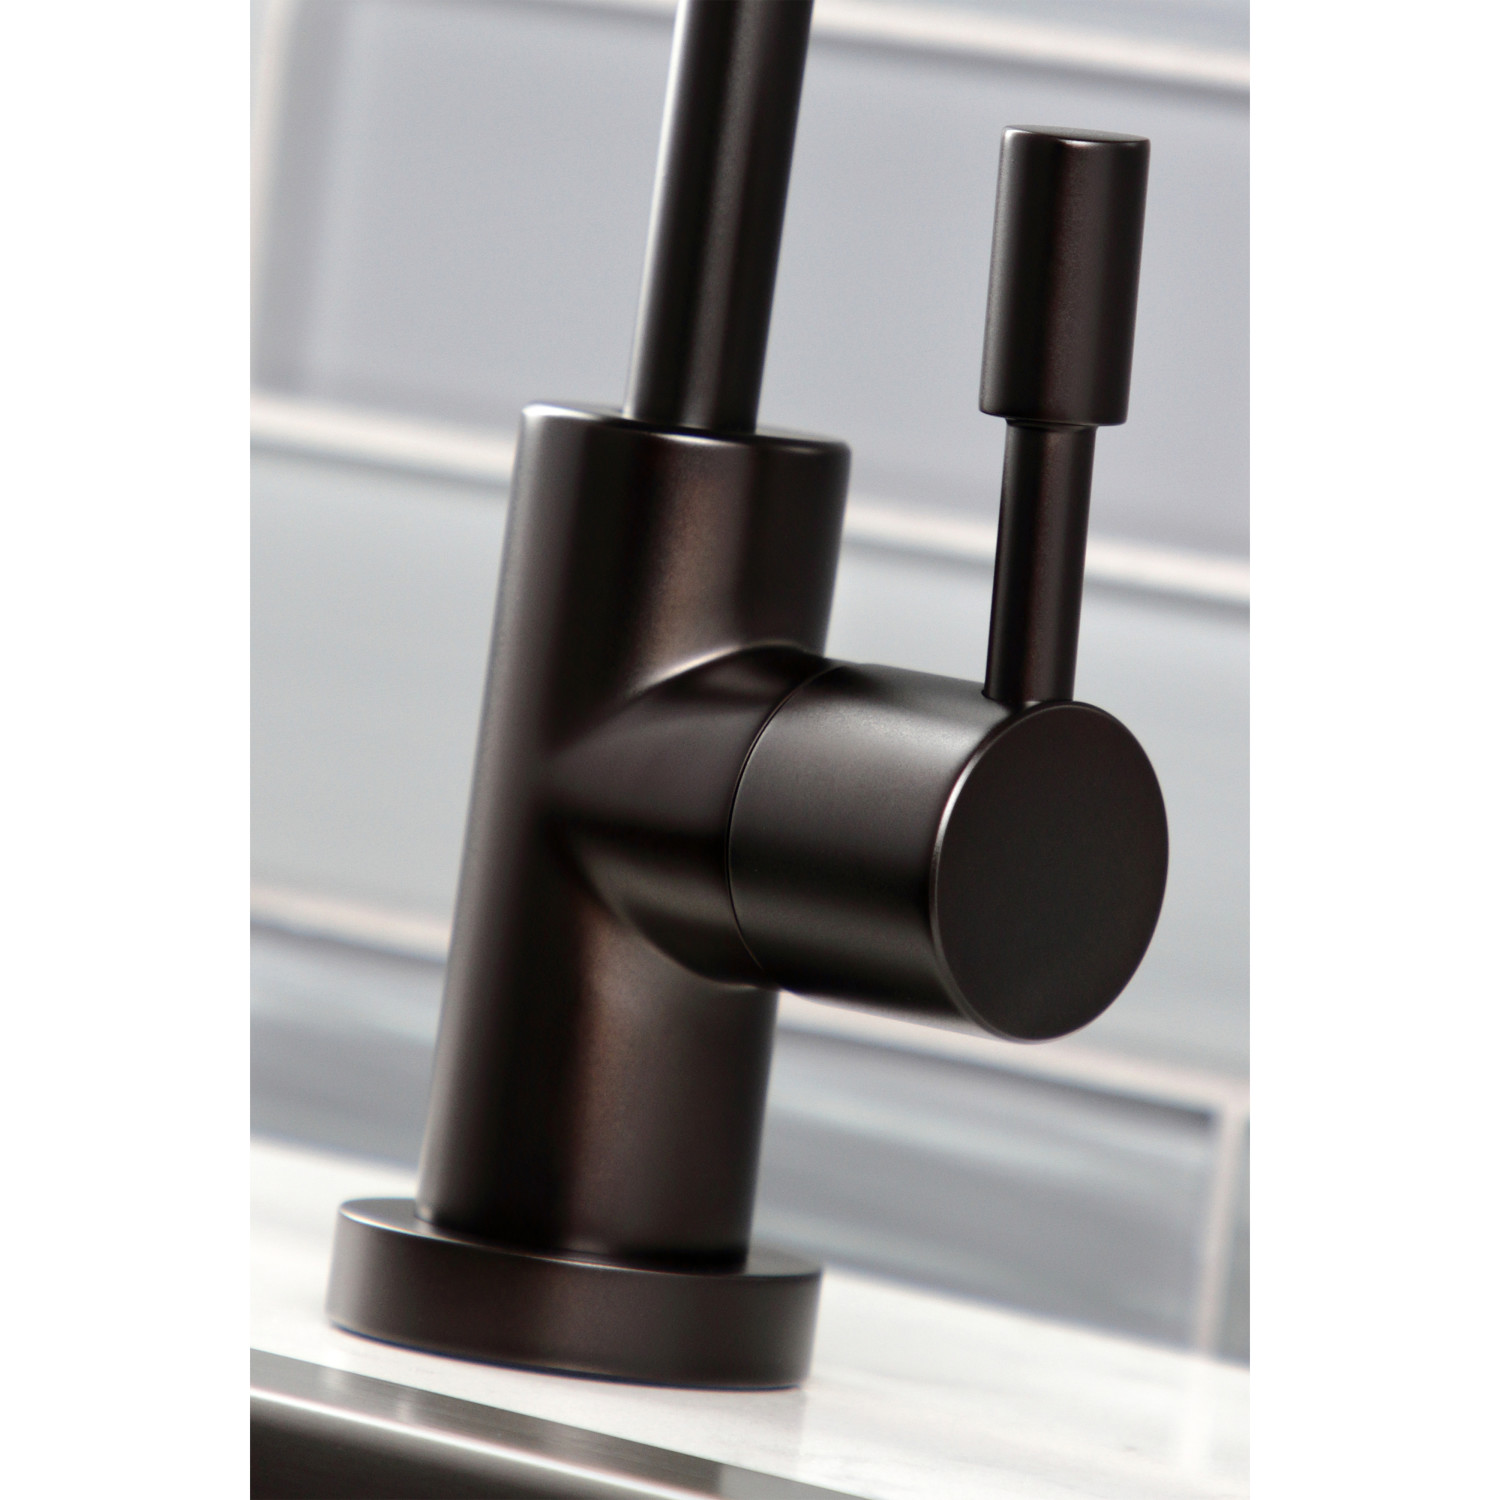 Kingston Brass KS6195DL Concord Single-Handle Water Filtration Faucet, Oil Rubbed Bronze - image 4 of 5